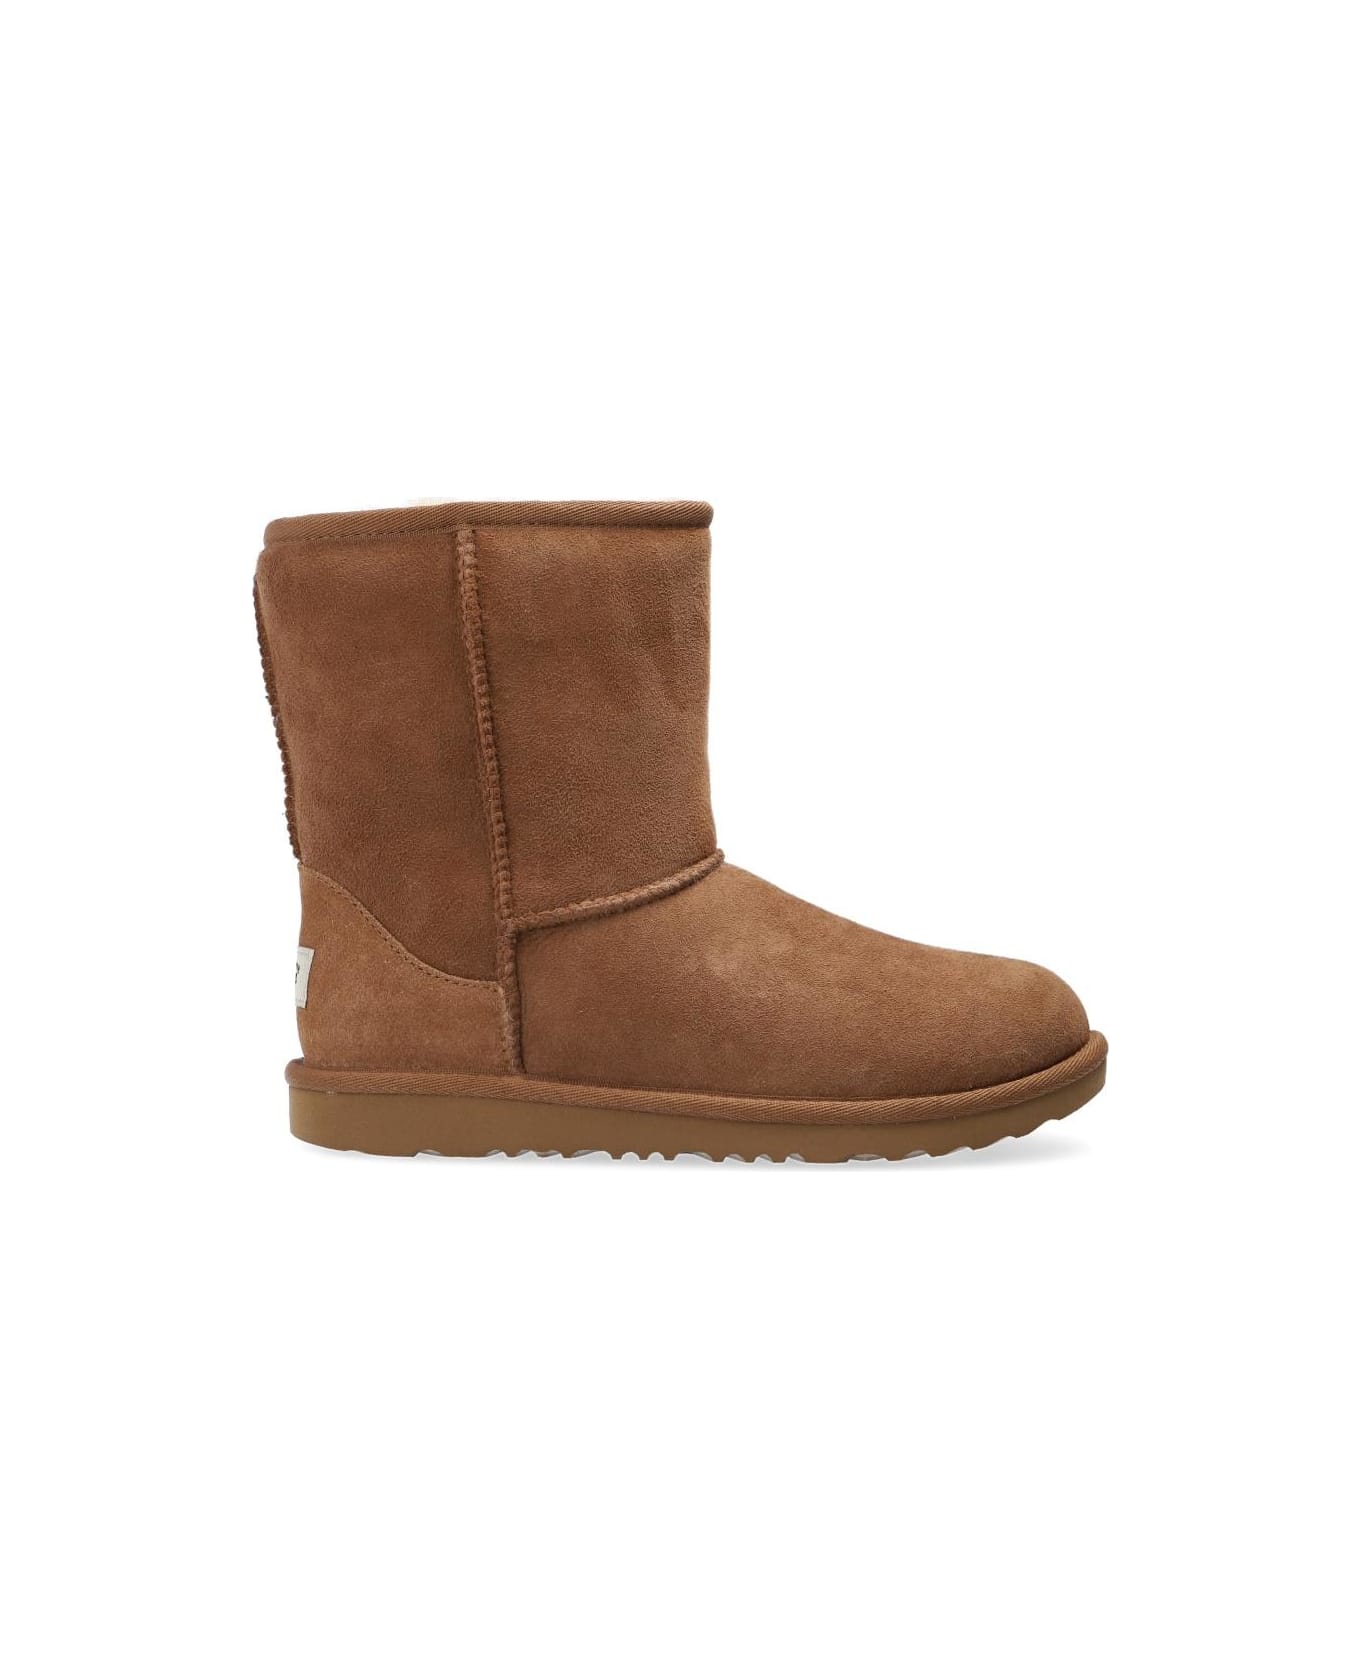 UGG 'classic Ii' Suede Snow Boots - Marrone